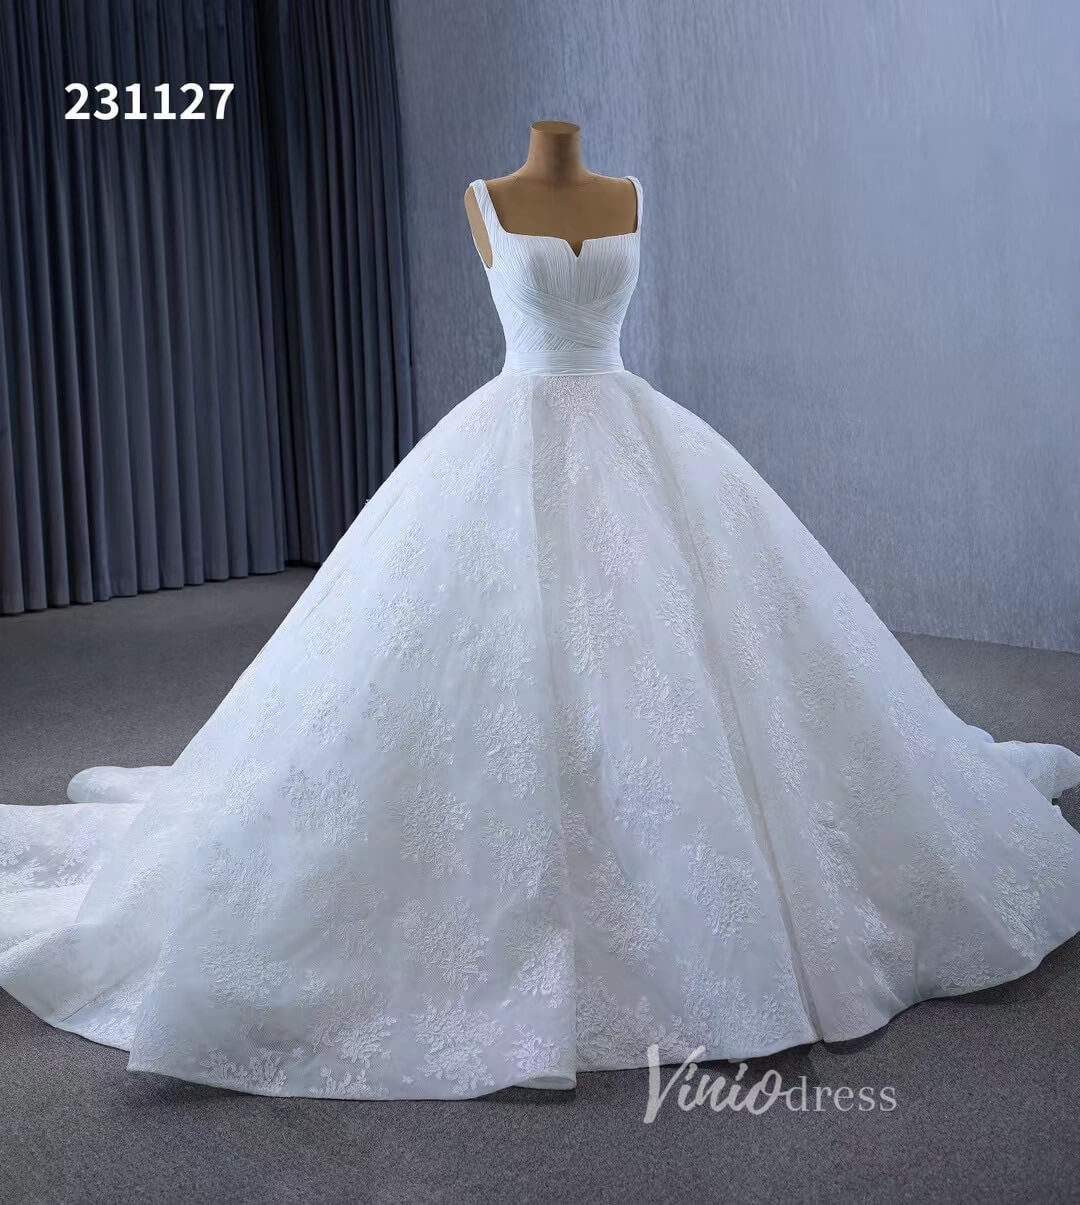 Luxury White Lace Ball Gown Wedding Dresses Corset Back 231127-wedding dresses-Viniodress-Viniodress